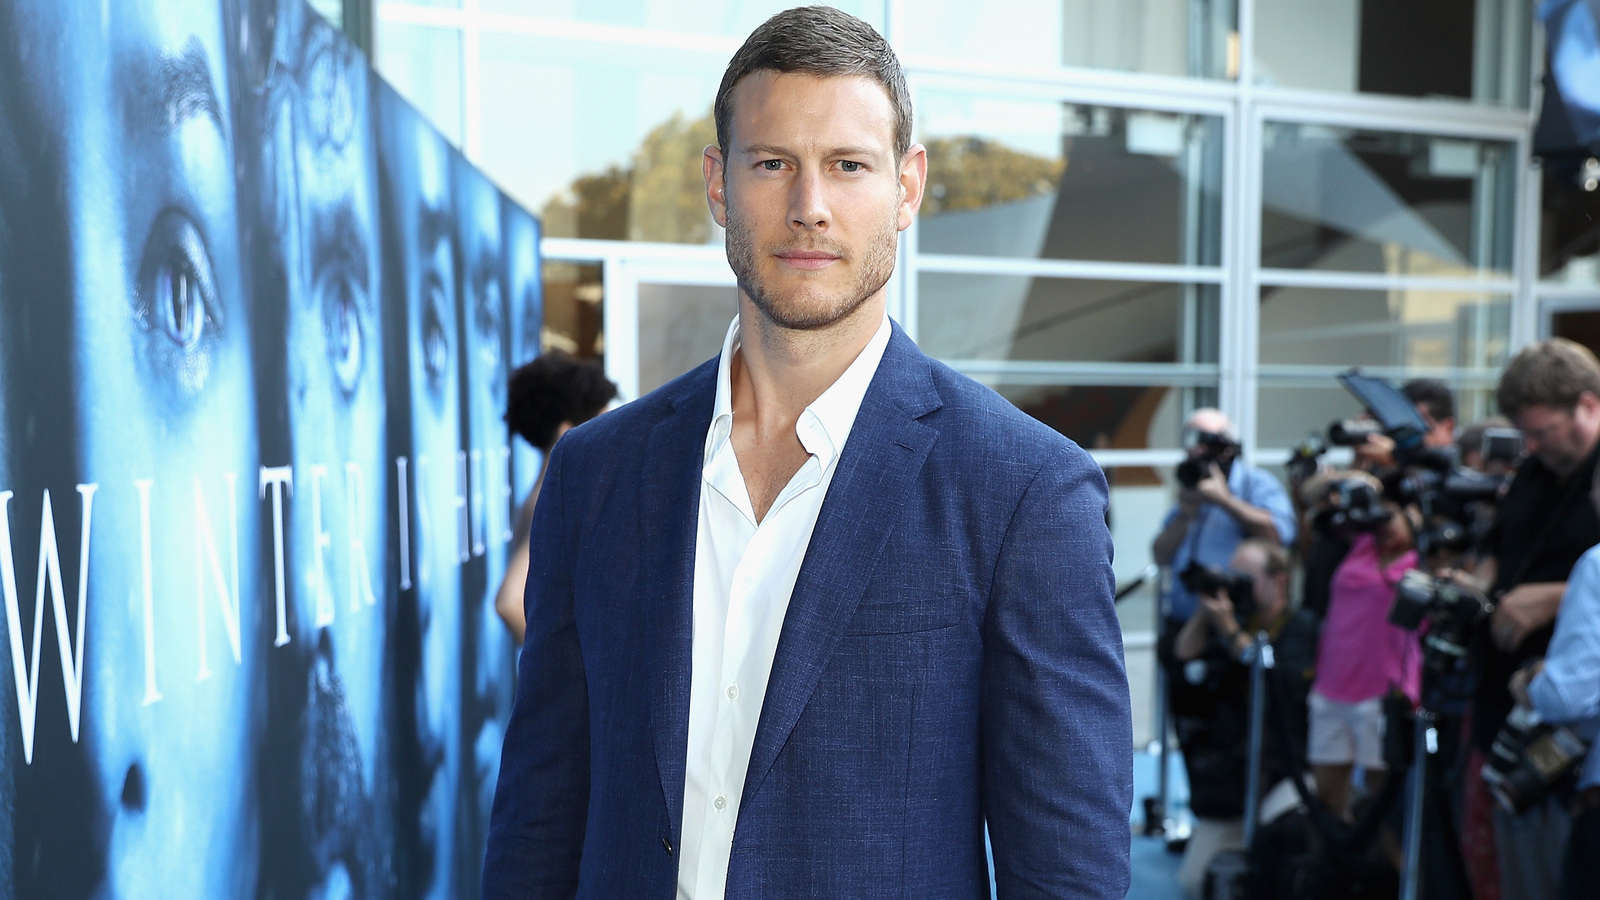 Tom Hopper attends the premiere of HBO's "Game Of Thrones" season 7